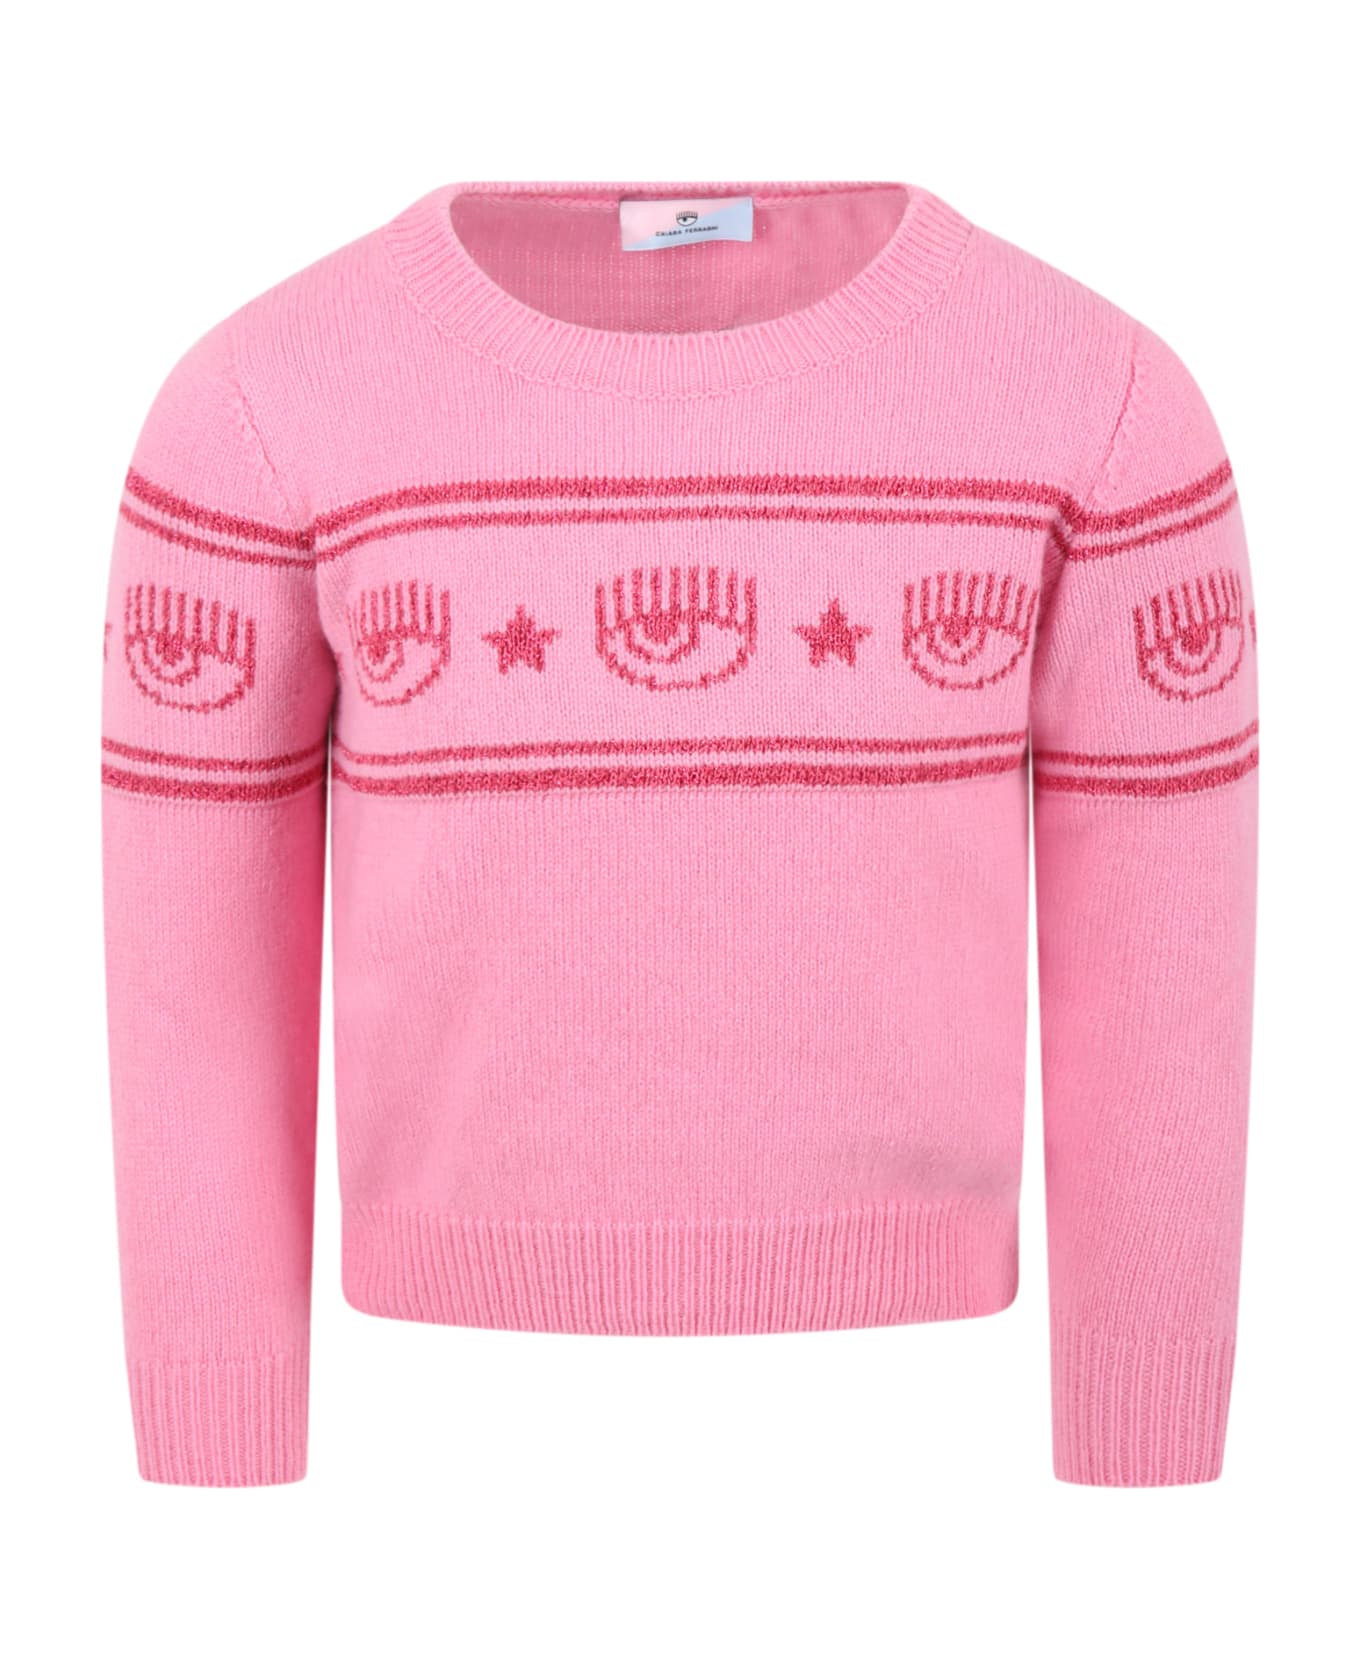 Chiara Ferragni Pink Sweater For Girl With Eyelike - PINK